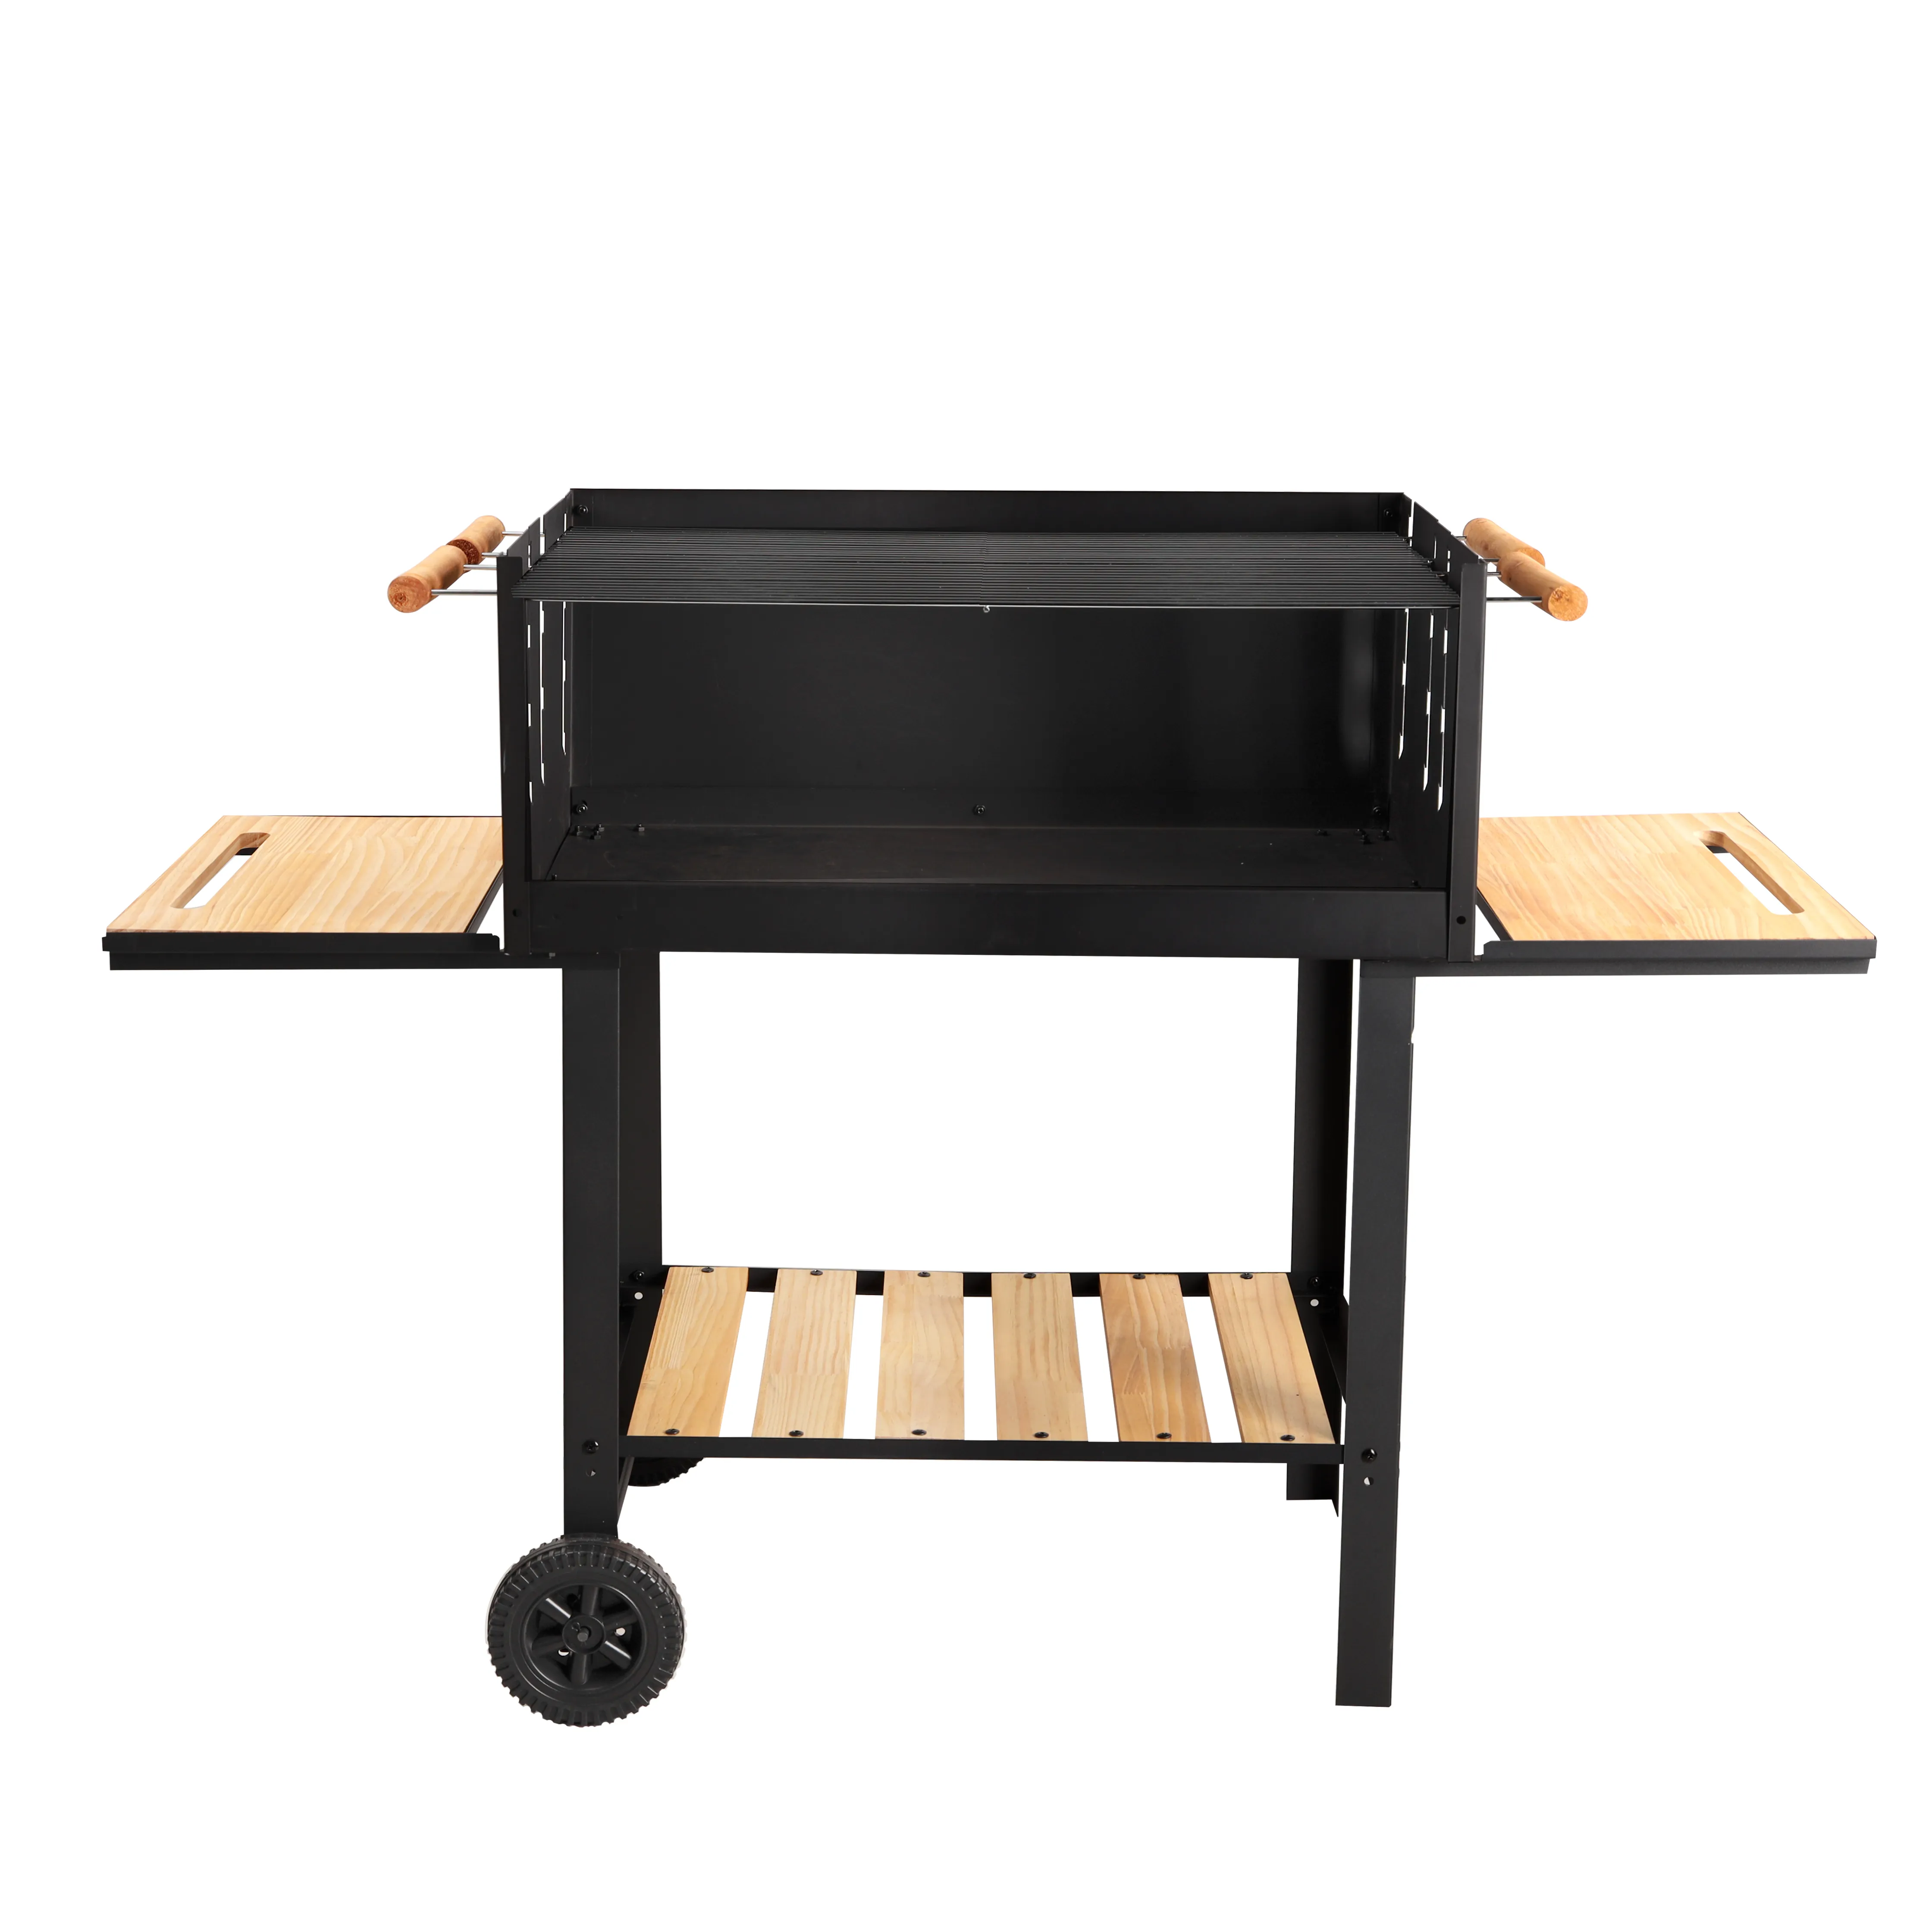 Royalford Barbecue Stand With Grill, RF10369 Premium Quality Iron Construction Barbecue Grills With Wheels Ideal For Camping, Backyard, Patio, Balcony Family Party